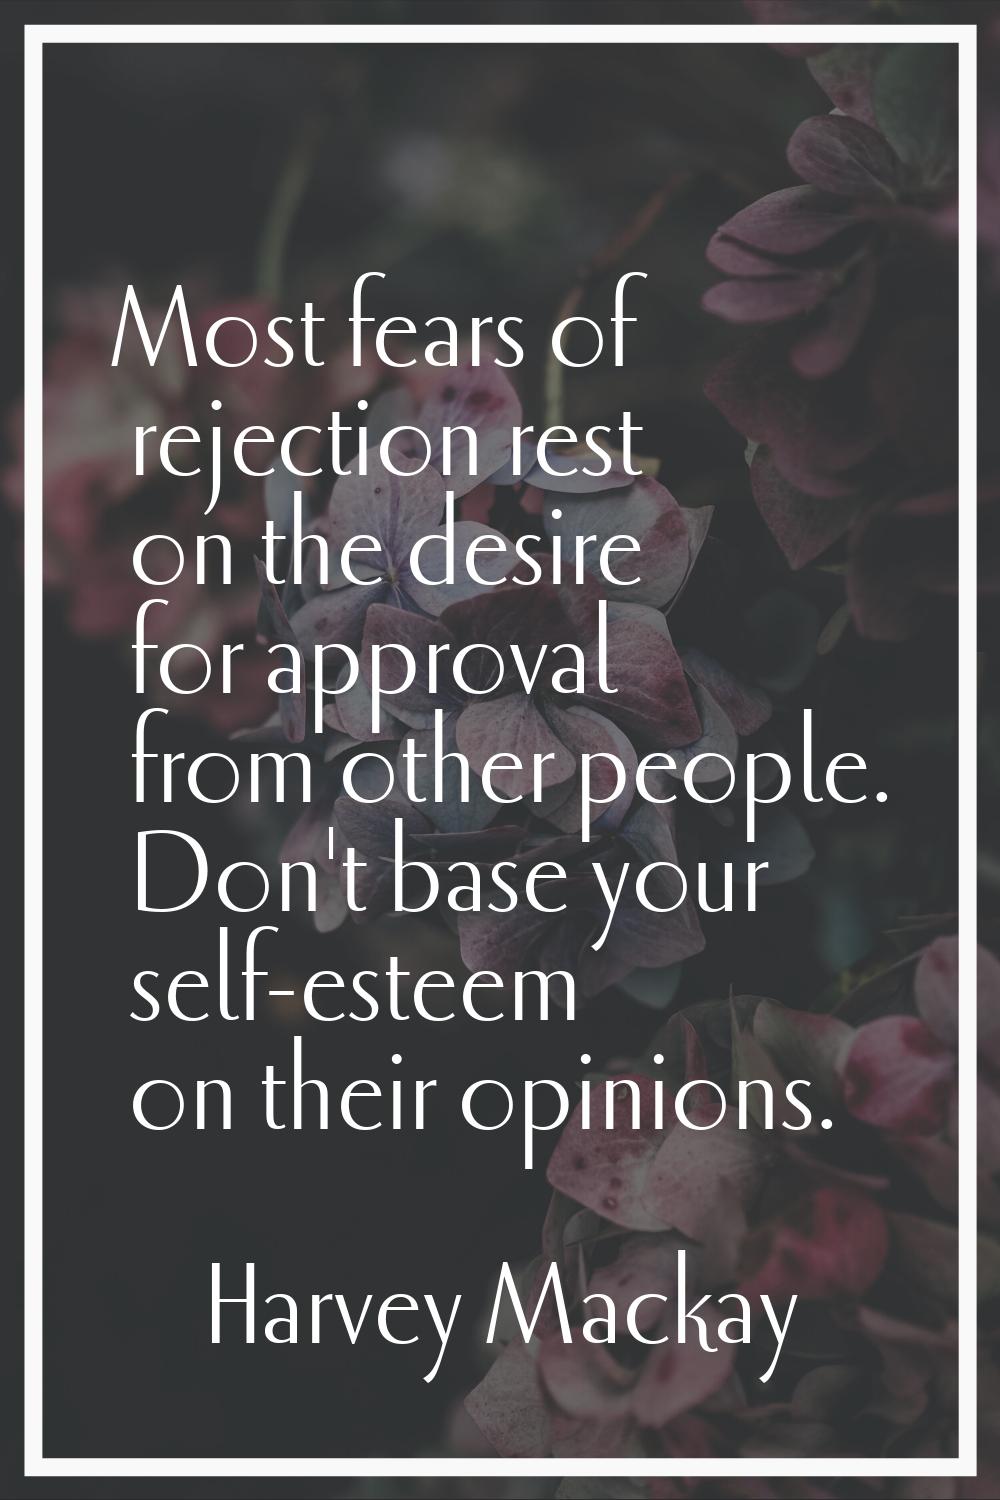 Most fears of rejection rest on the desire for approval from other people. Don't base your self-est